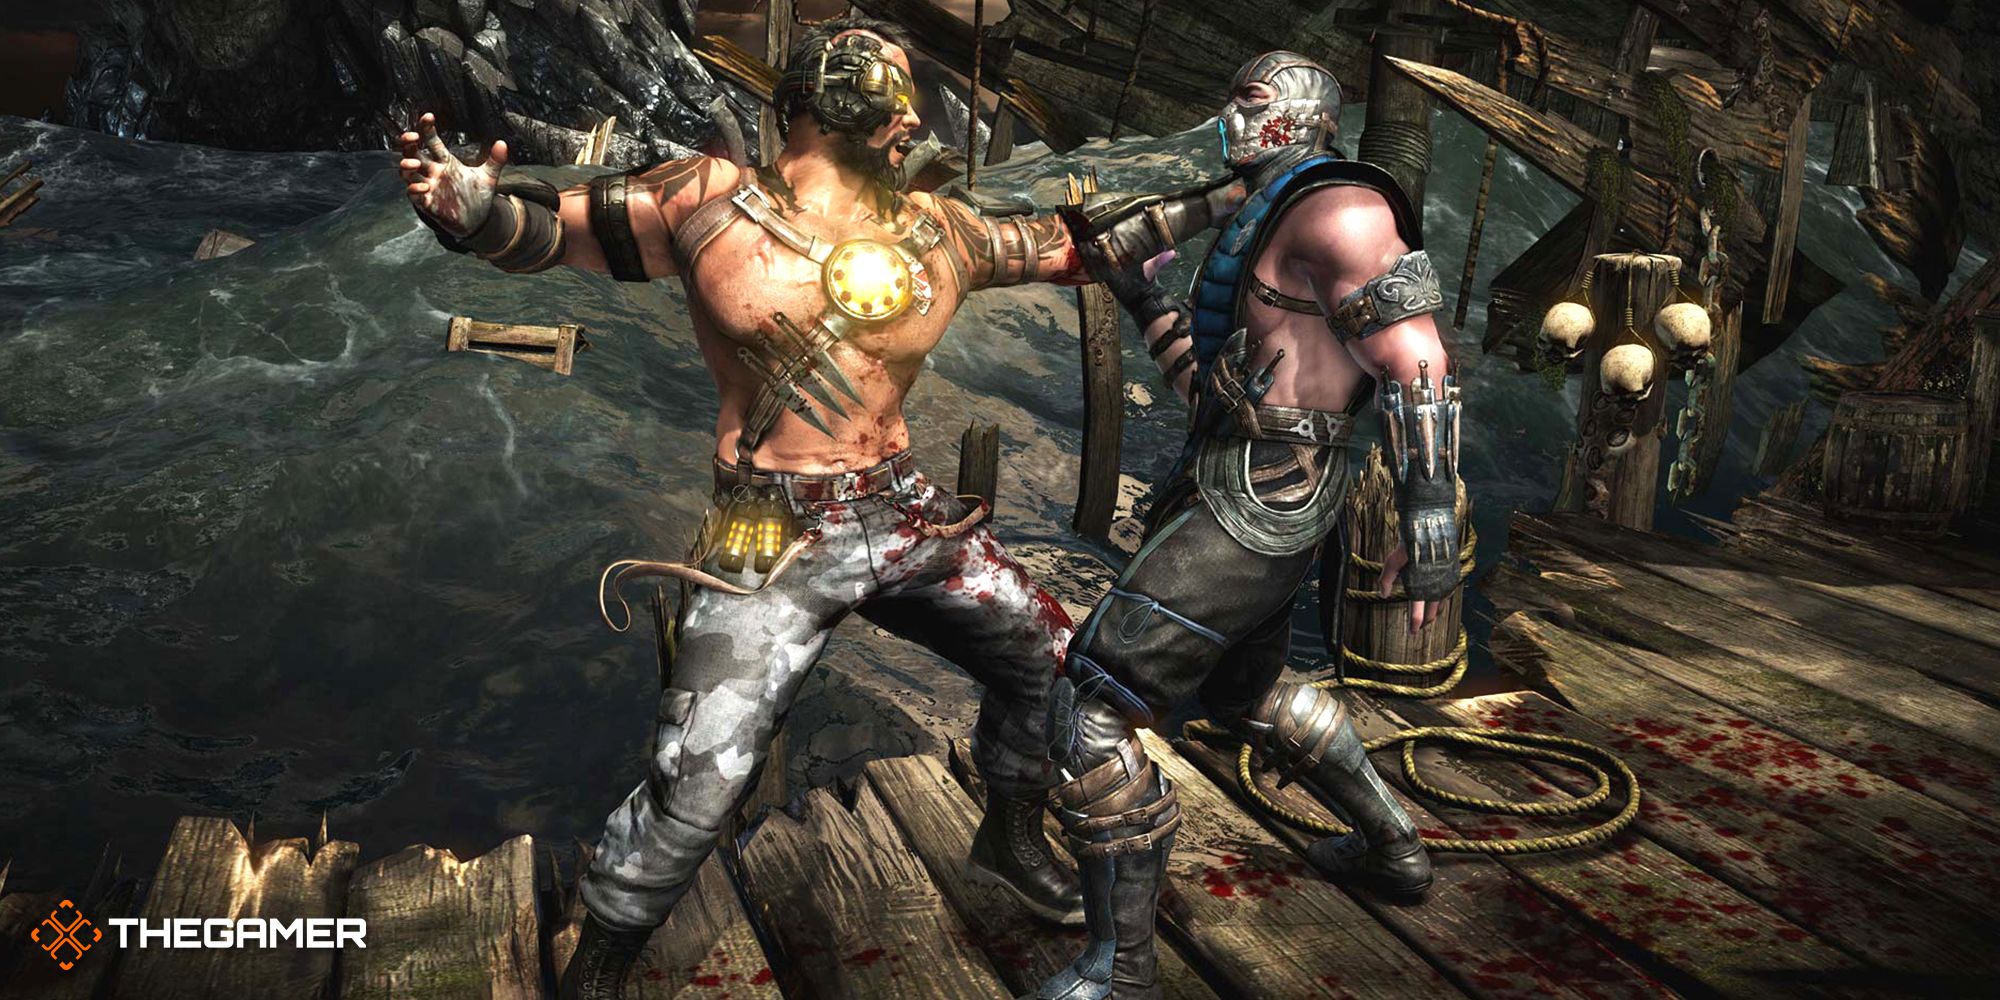 Mortal Kombat 11 Ultimate: How to Perform All Stage Fatalities